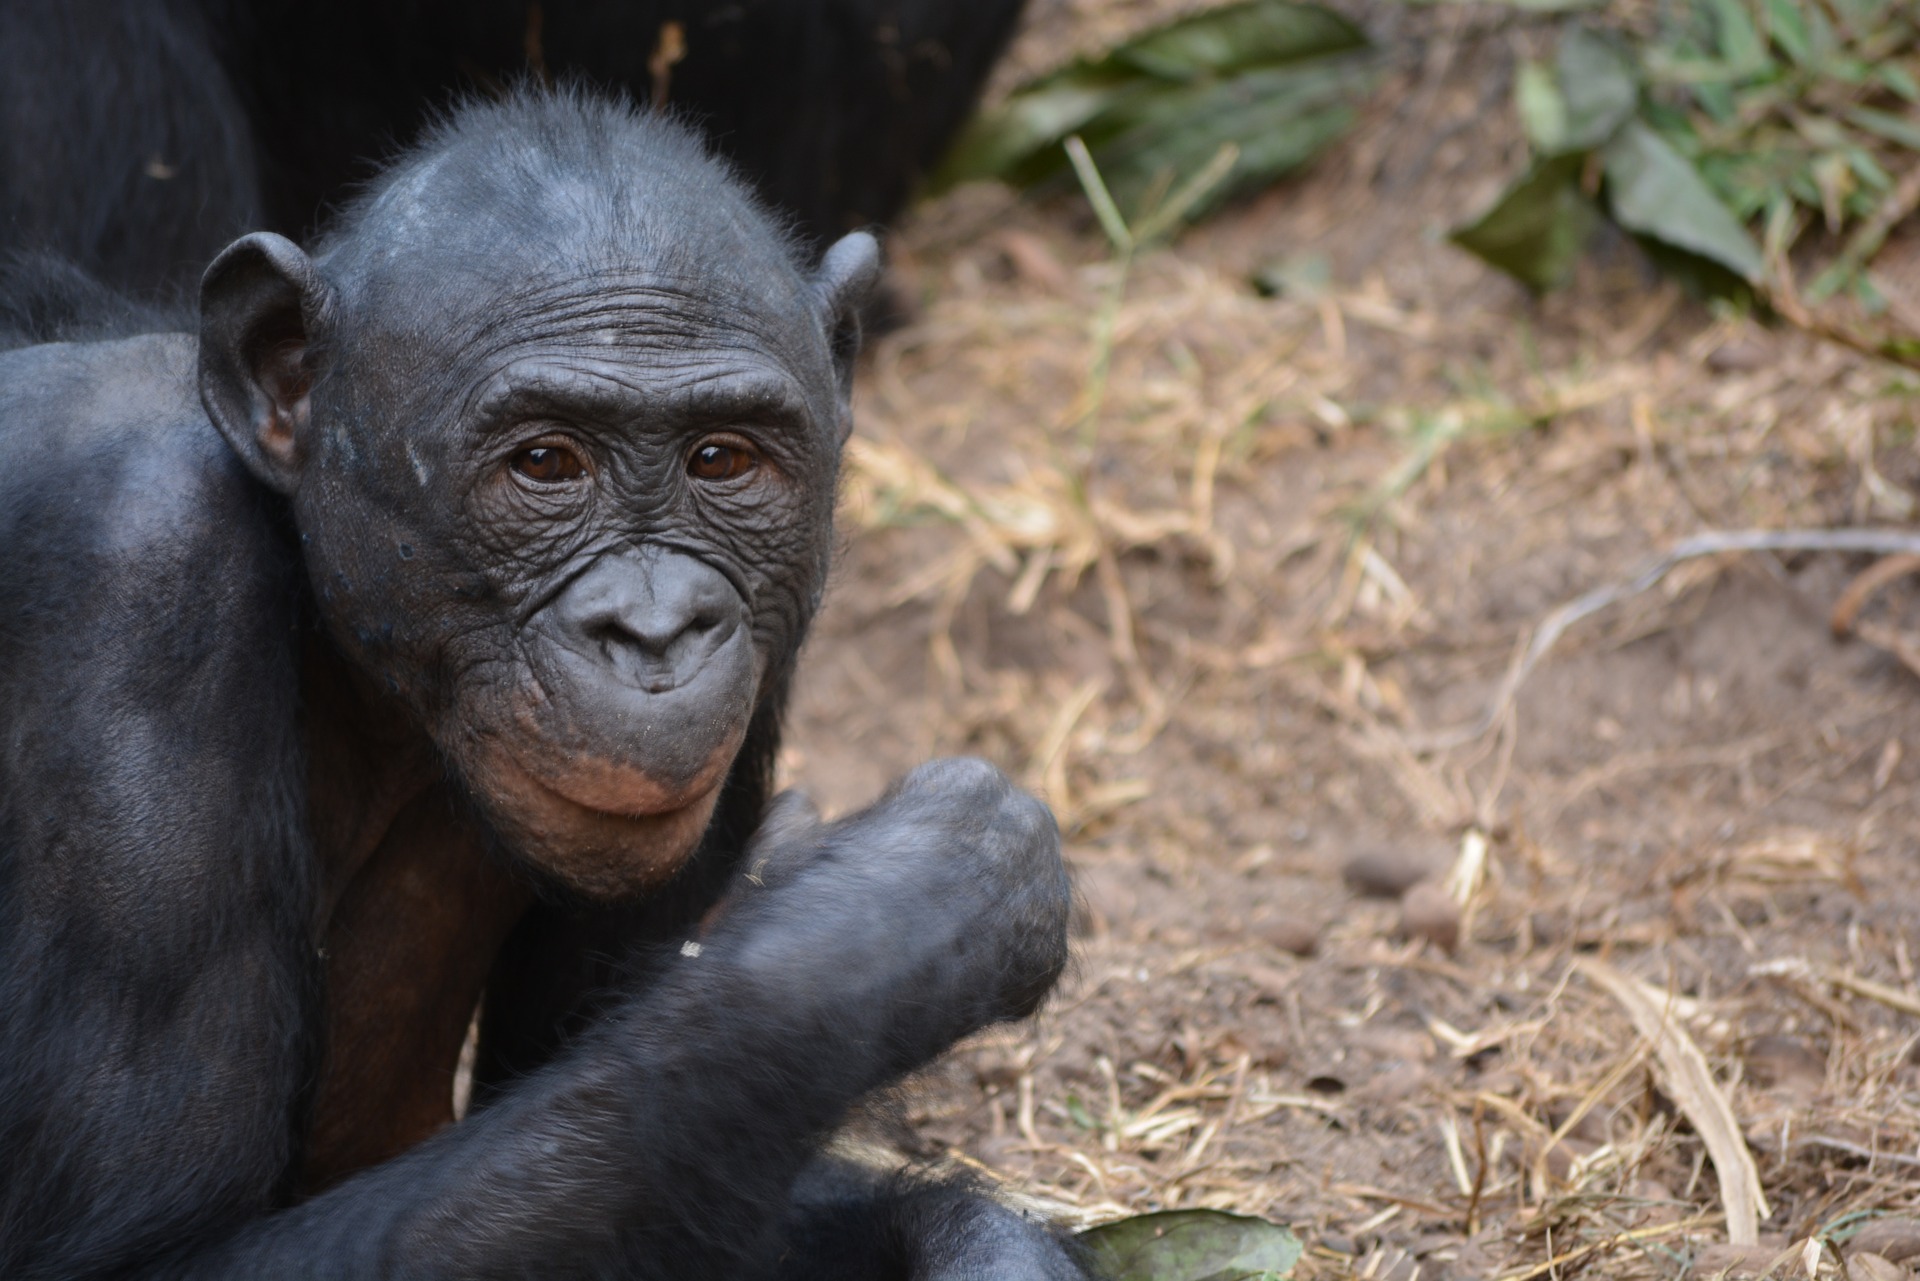 Bonobo ladies get to choose their mates and boy oh boy are they picky